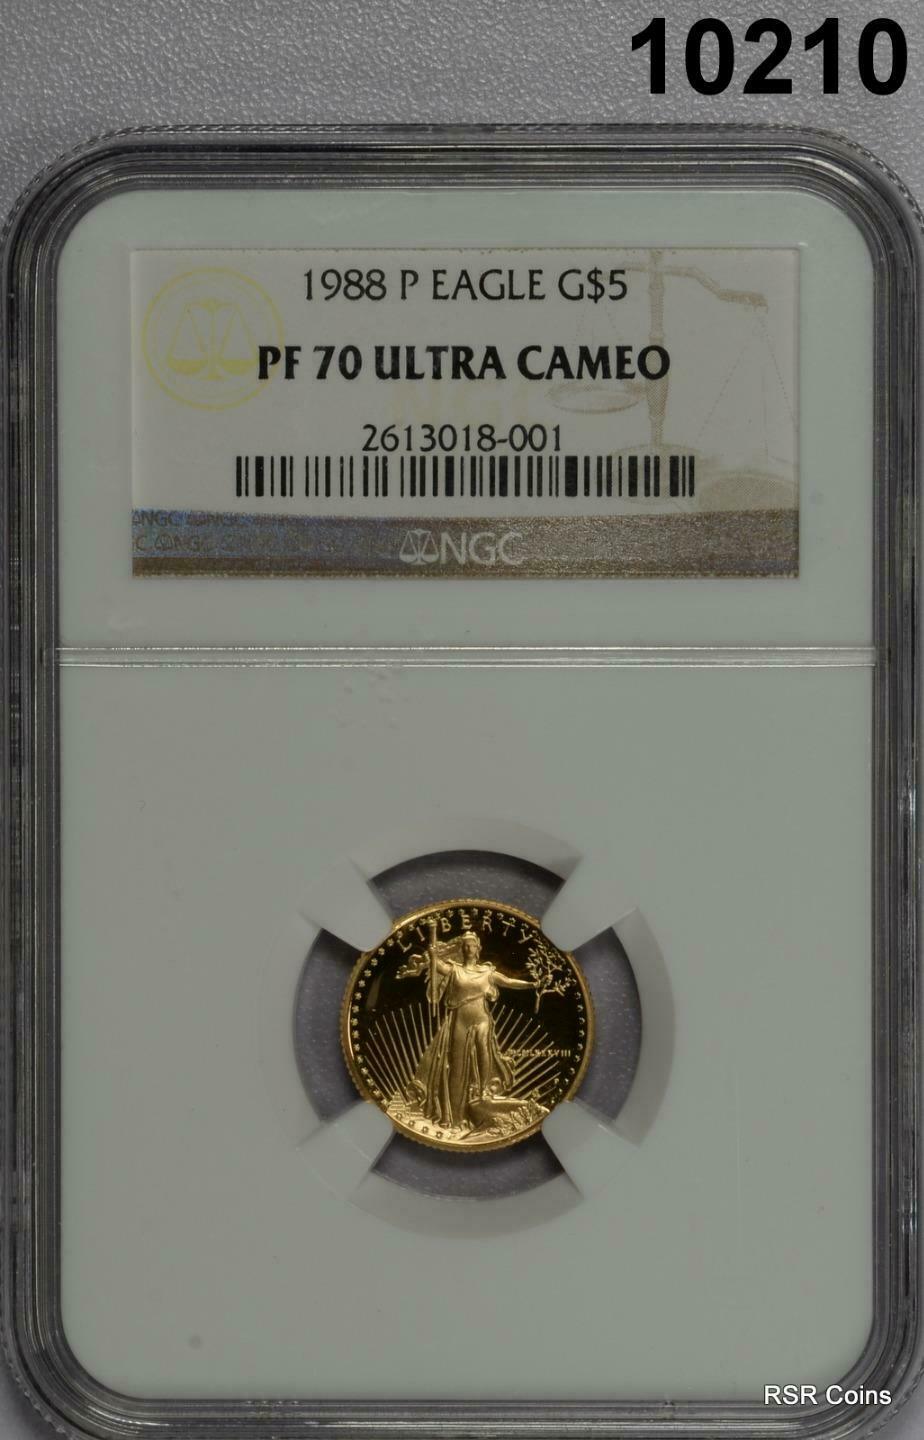 1988 P G $5 GOLD EAGLE NGC CERTIFIED PF70 ULTRA CAMEO NICE! #10210